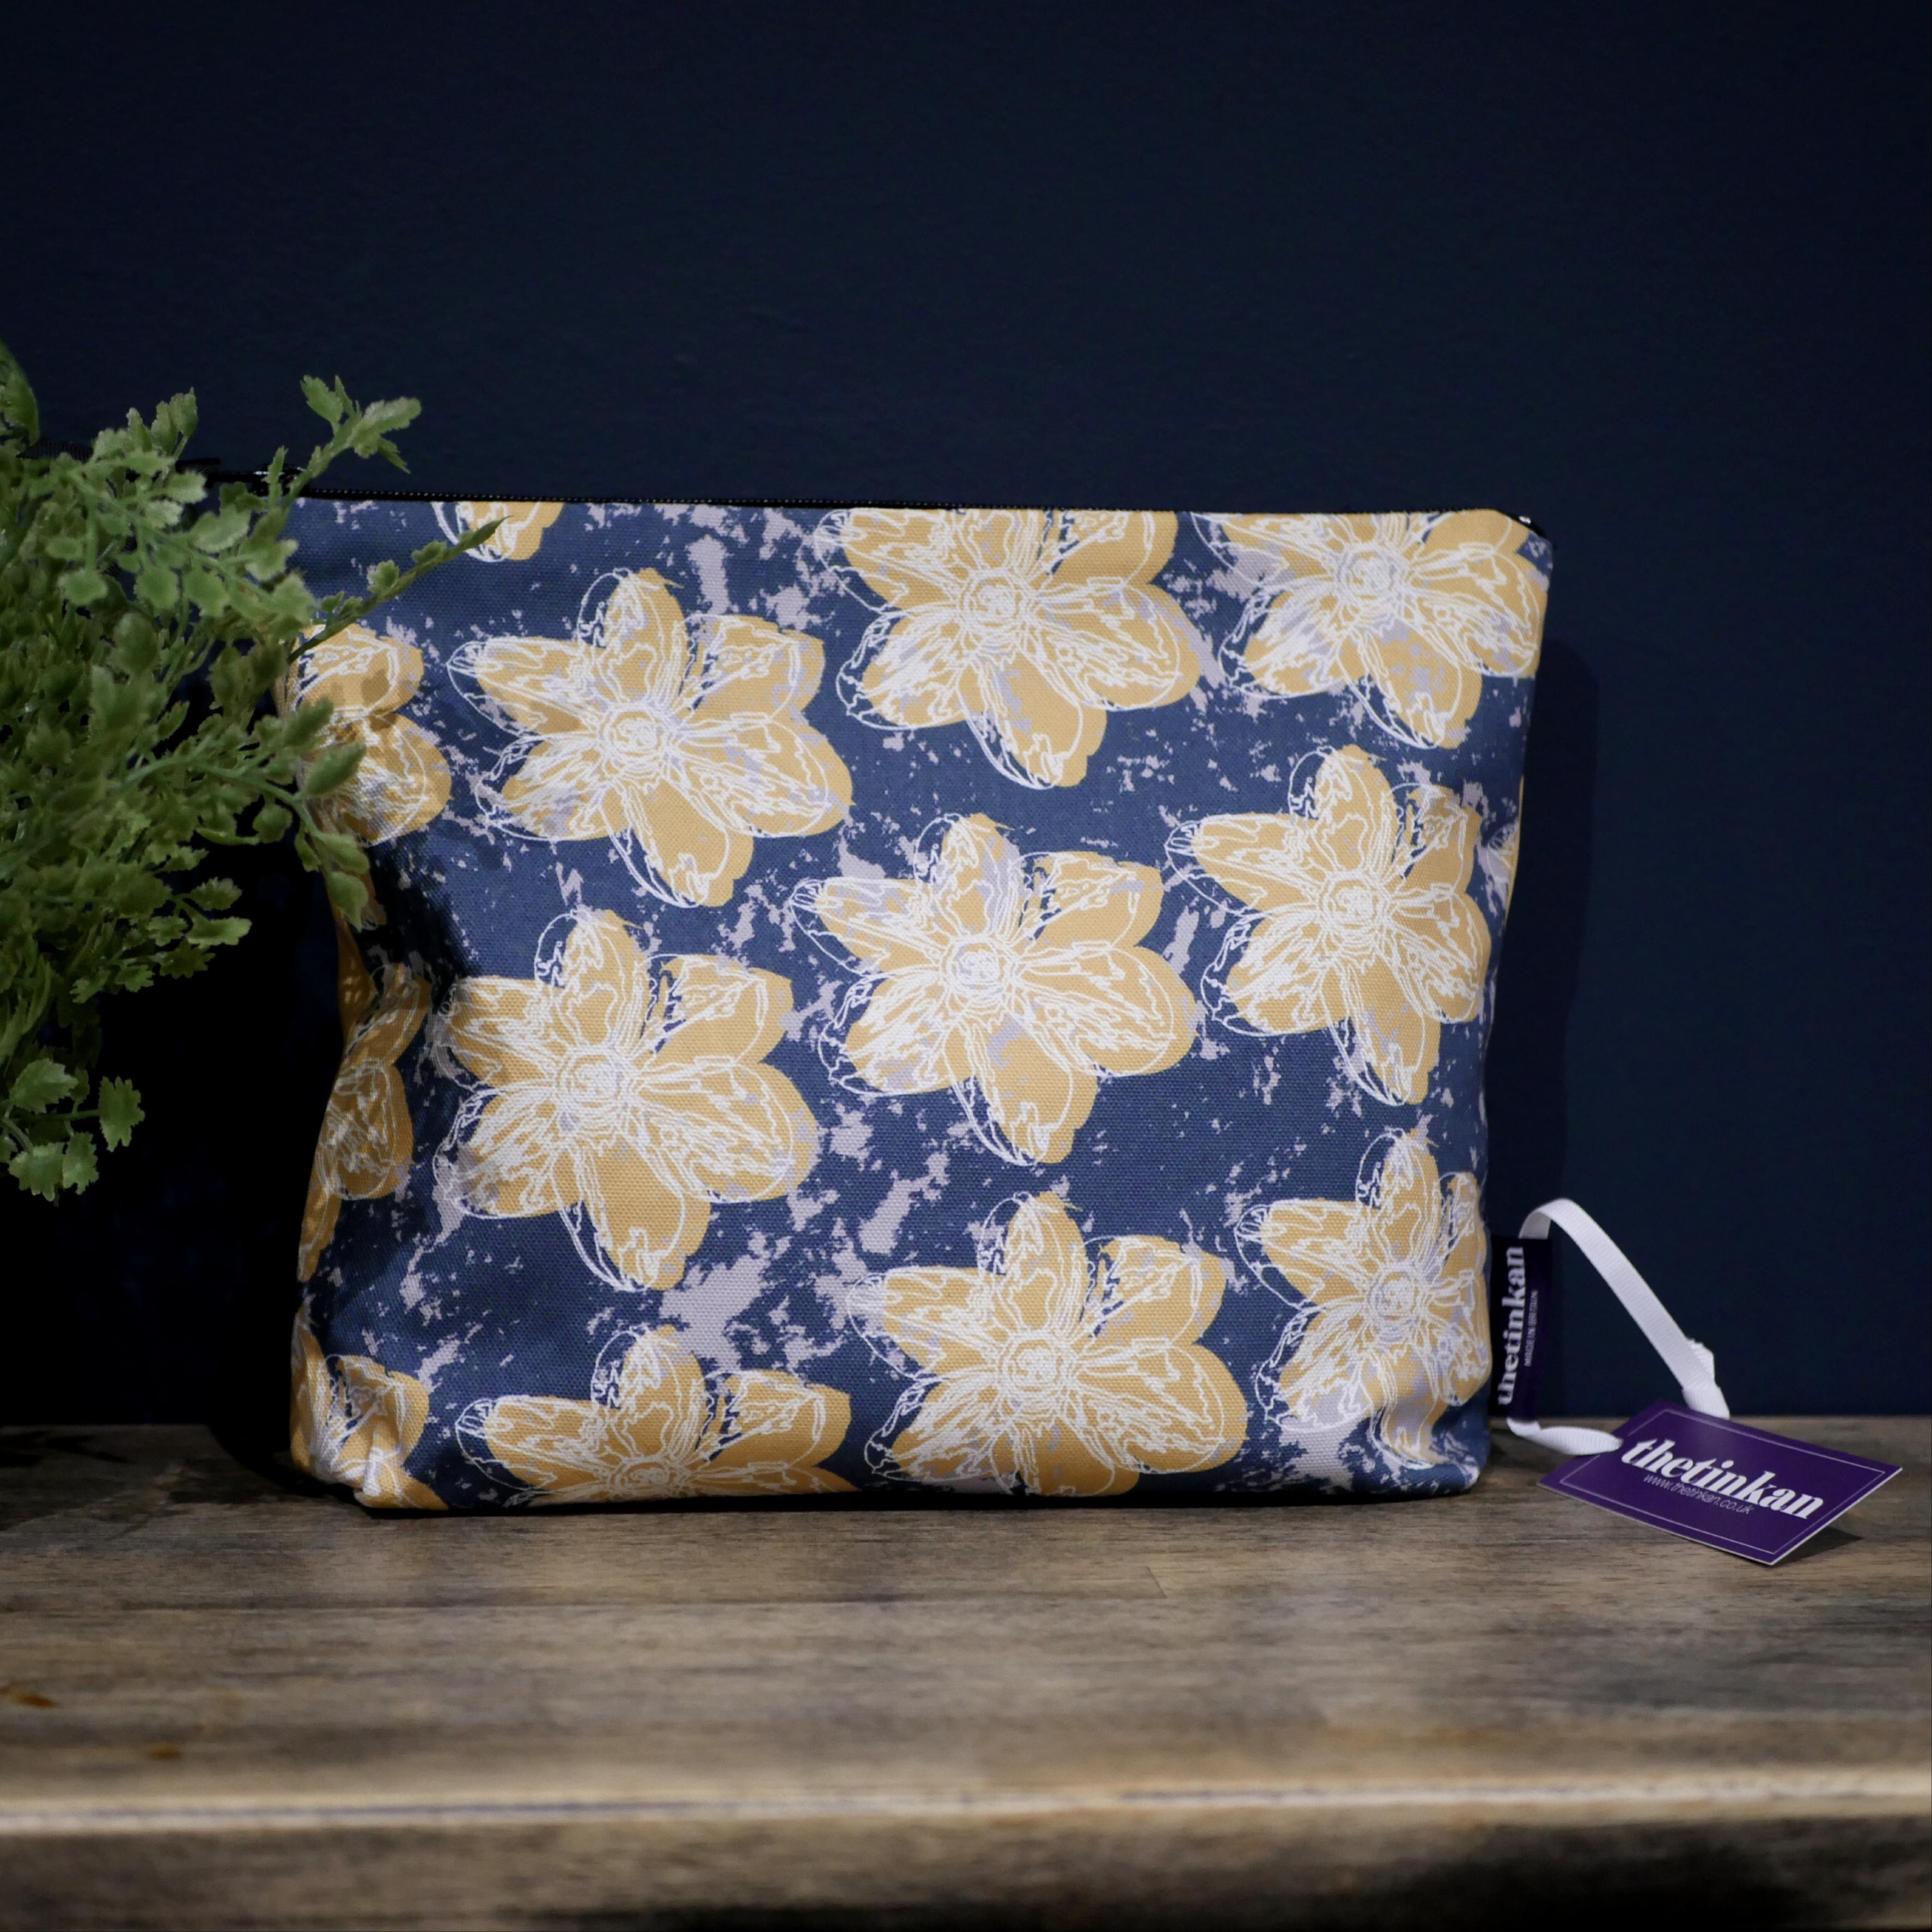 Mustard yellow flower with a matching coloured reverse, set on an oxford blue background with a light grey colour splash. Designed by thetinkan, the flower splash travel beauty washbag featuring the white traced outline of a?narcissus flower is made from panama cotton with black waterproof lining and matching black sturdy zip. Generously sized for all your travel or home needs.? VIEW PRODUCT >>